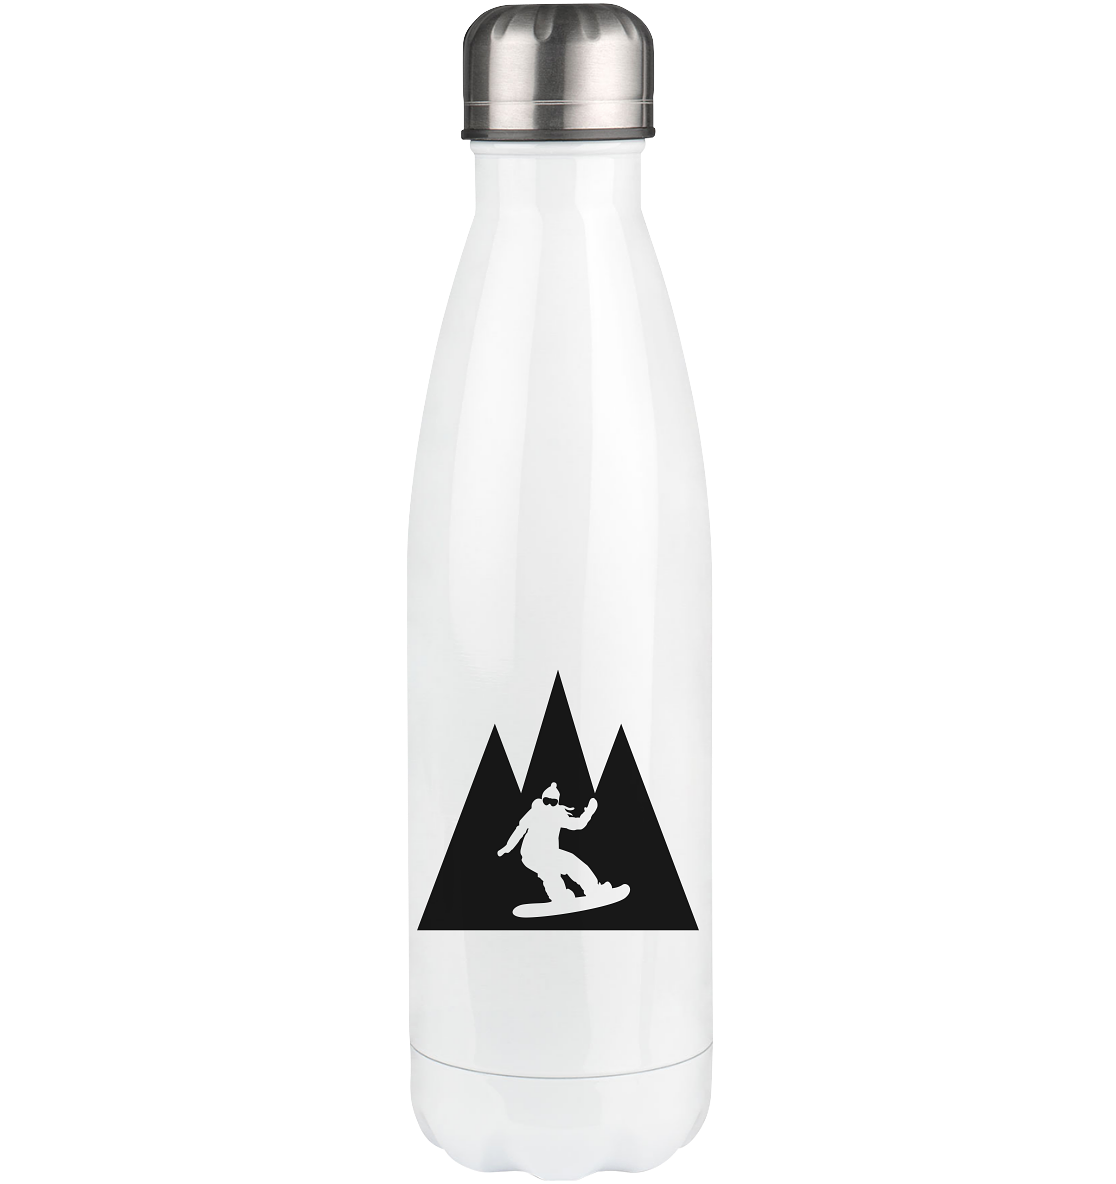 Triangle Mountain and Snowboarding - Edelstahl Thermosflasche snowboarden 500ml